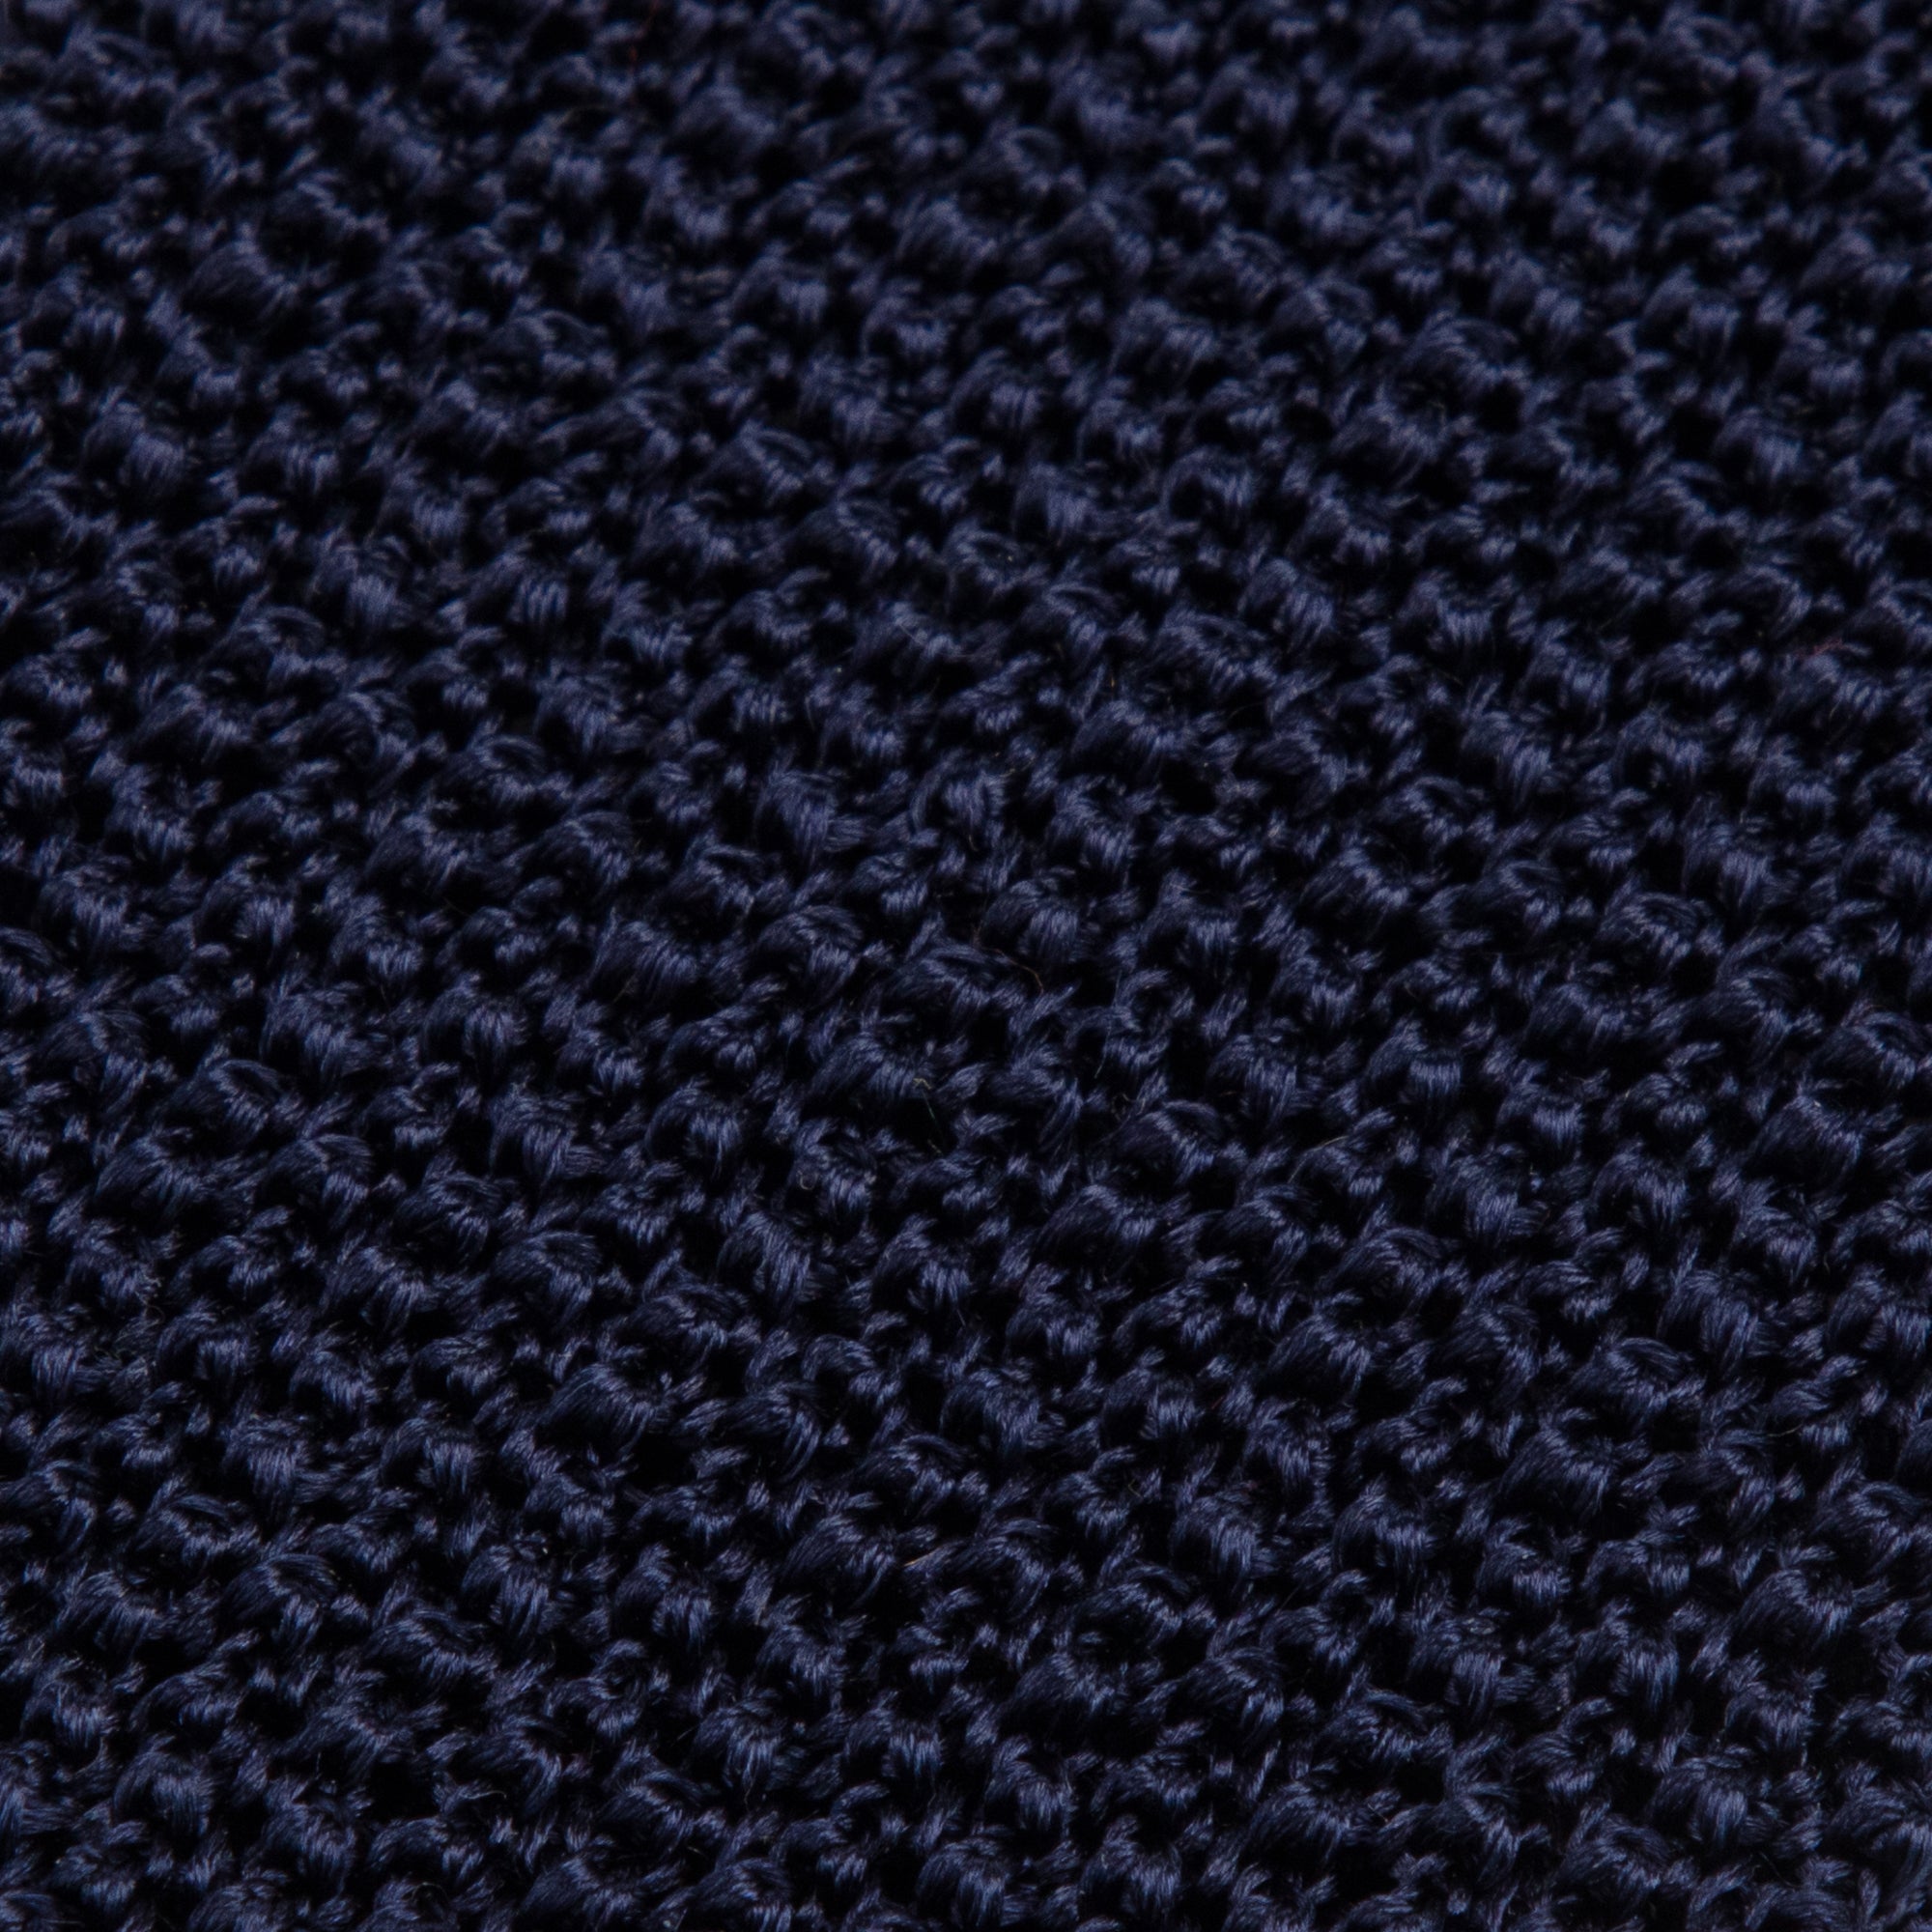 Navy Blue Solid Knitted Tie